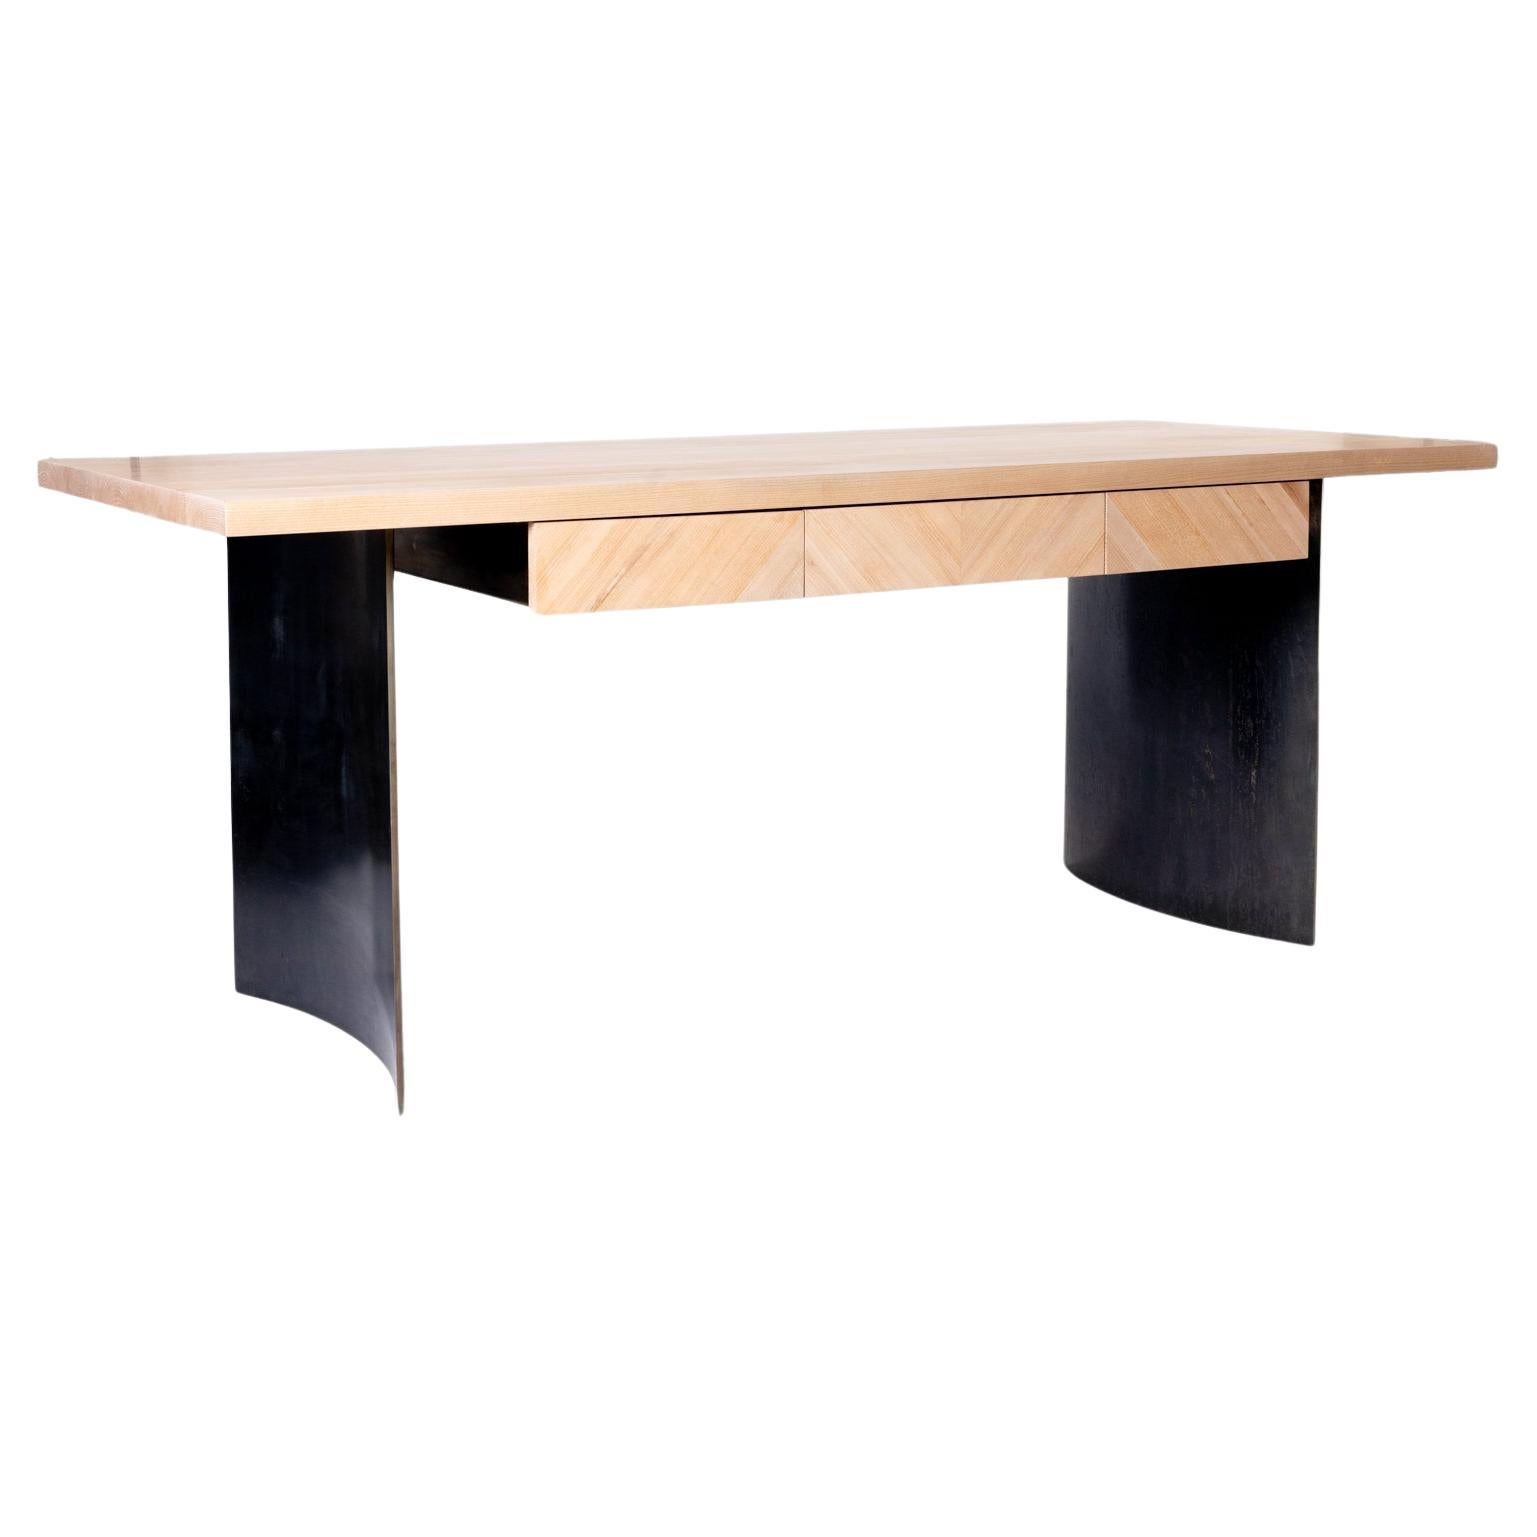 Ban Curved Steel and Maple Wood Desk by Autonomous Furniture